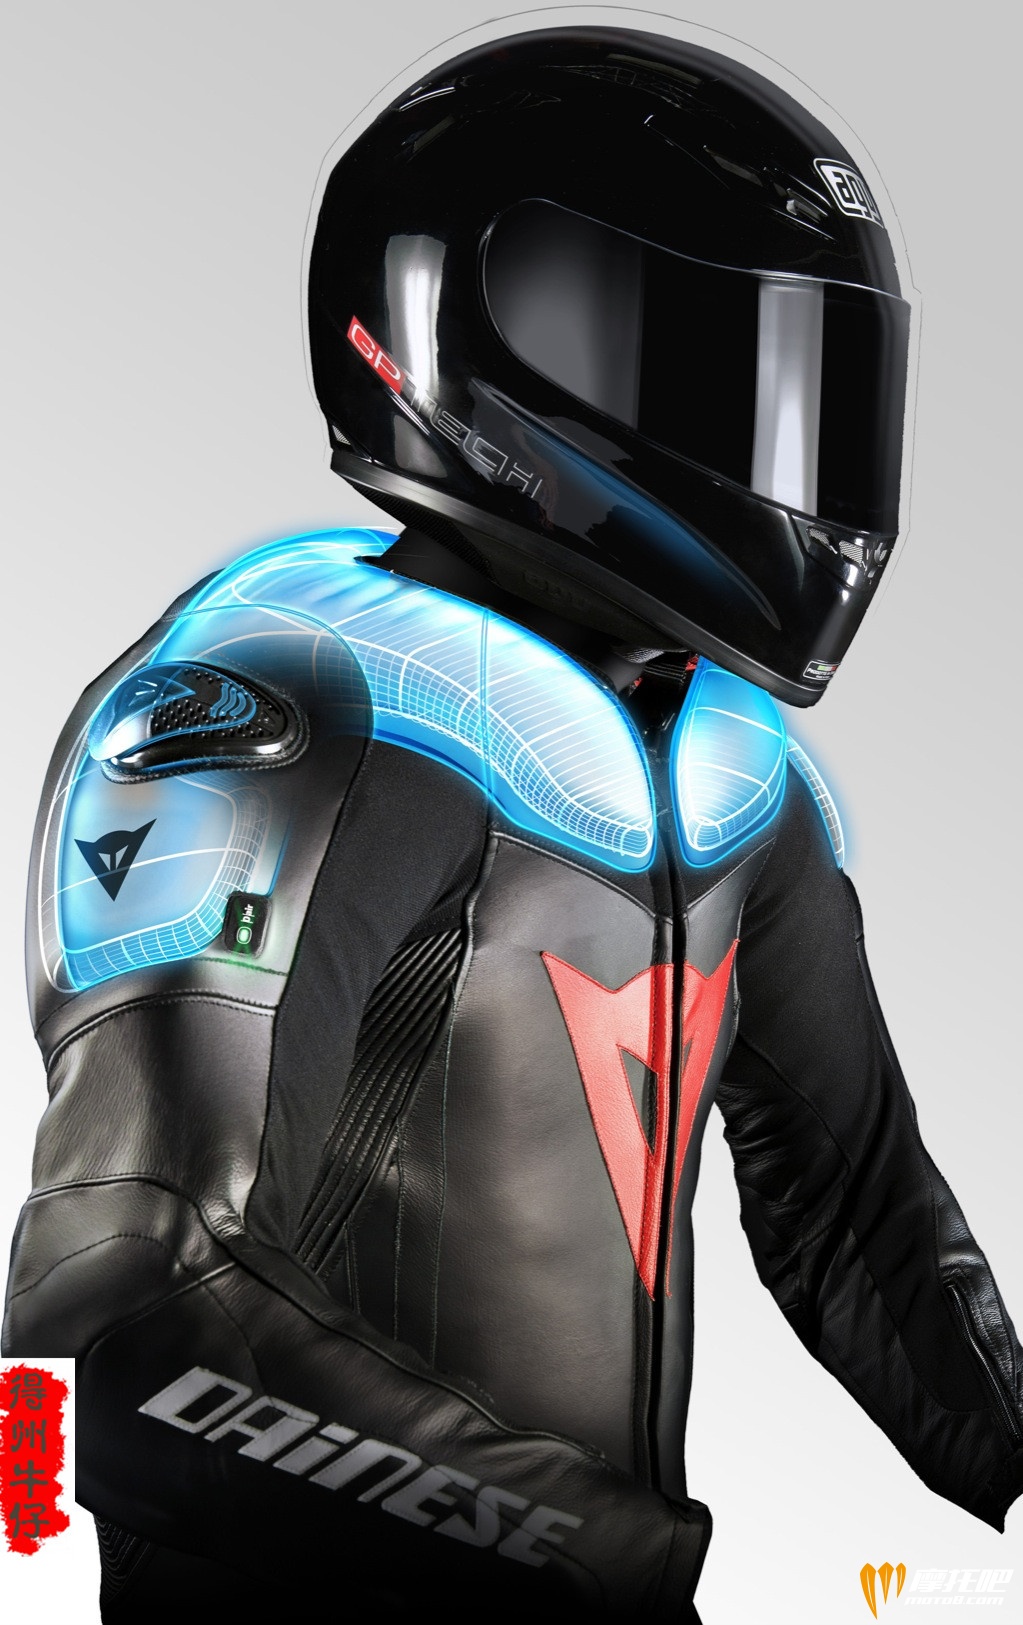 dainese-d-air-racing-suit-airbag-system-supports-google-earth_3.jpg